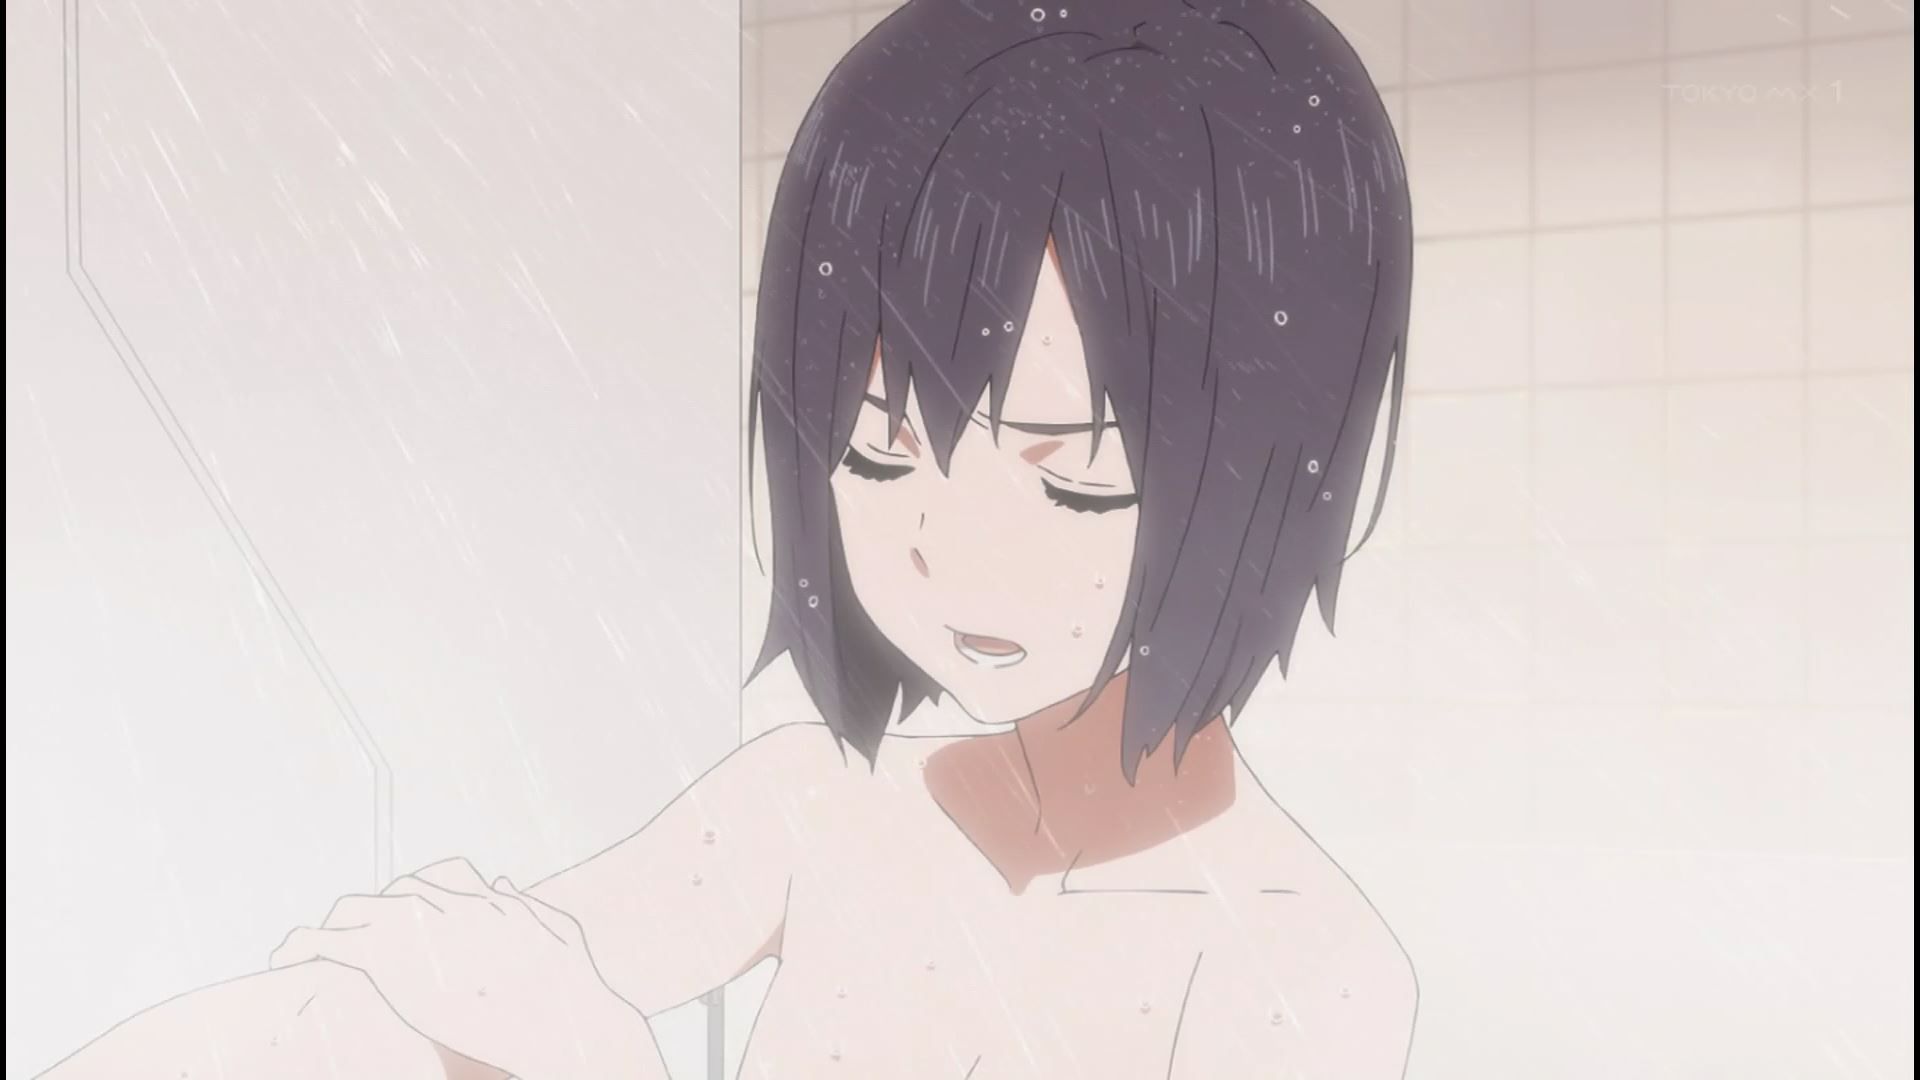 such as the bath scene and the girl's suit melts in anime ' darling in the Franc kiss ' 8 story! 11